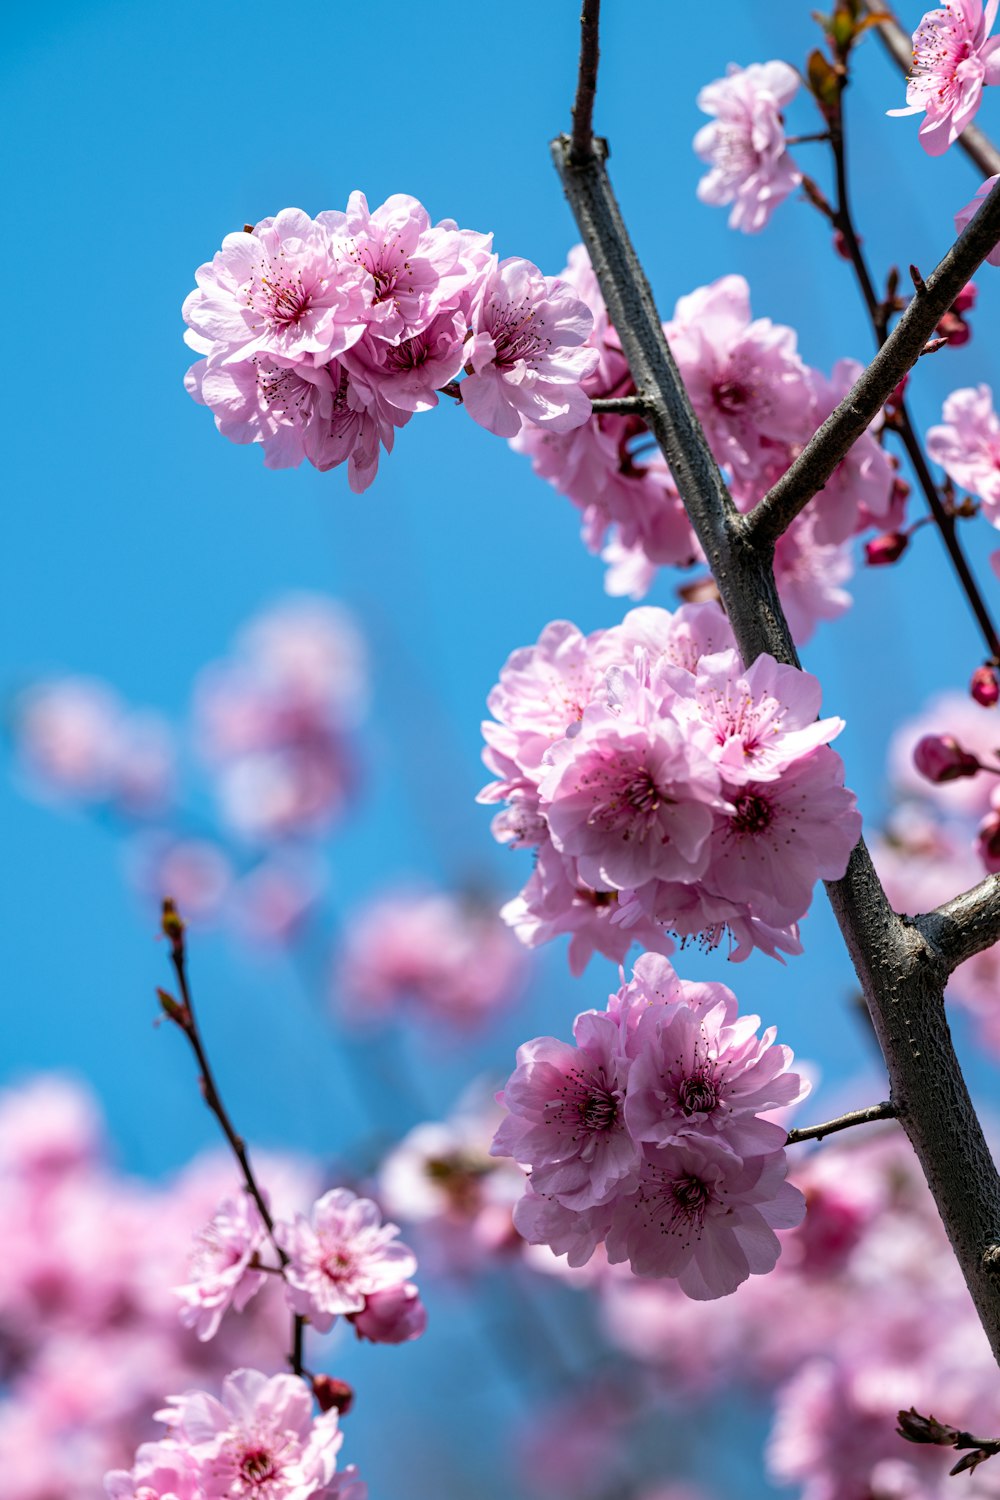 a branch with pink flowers on it against a blue sky